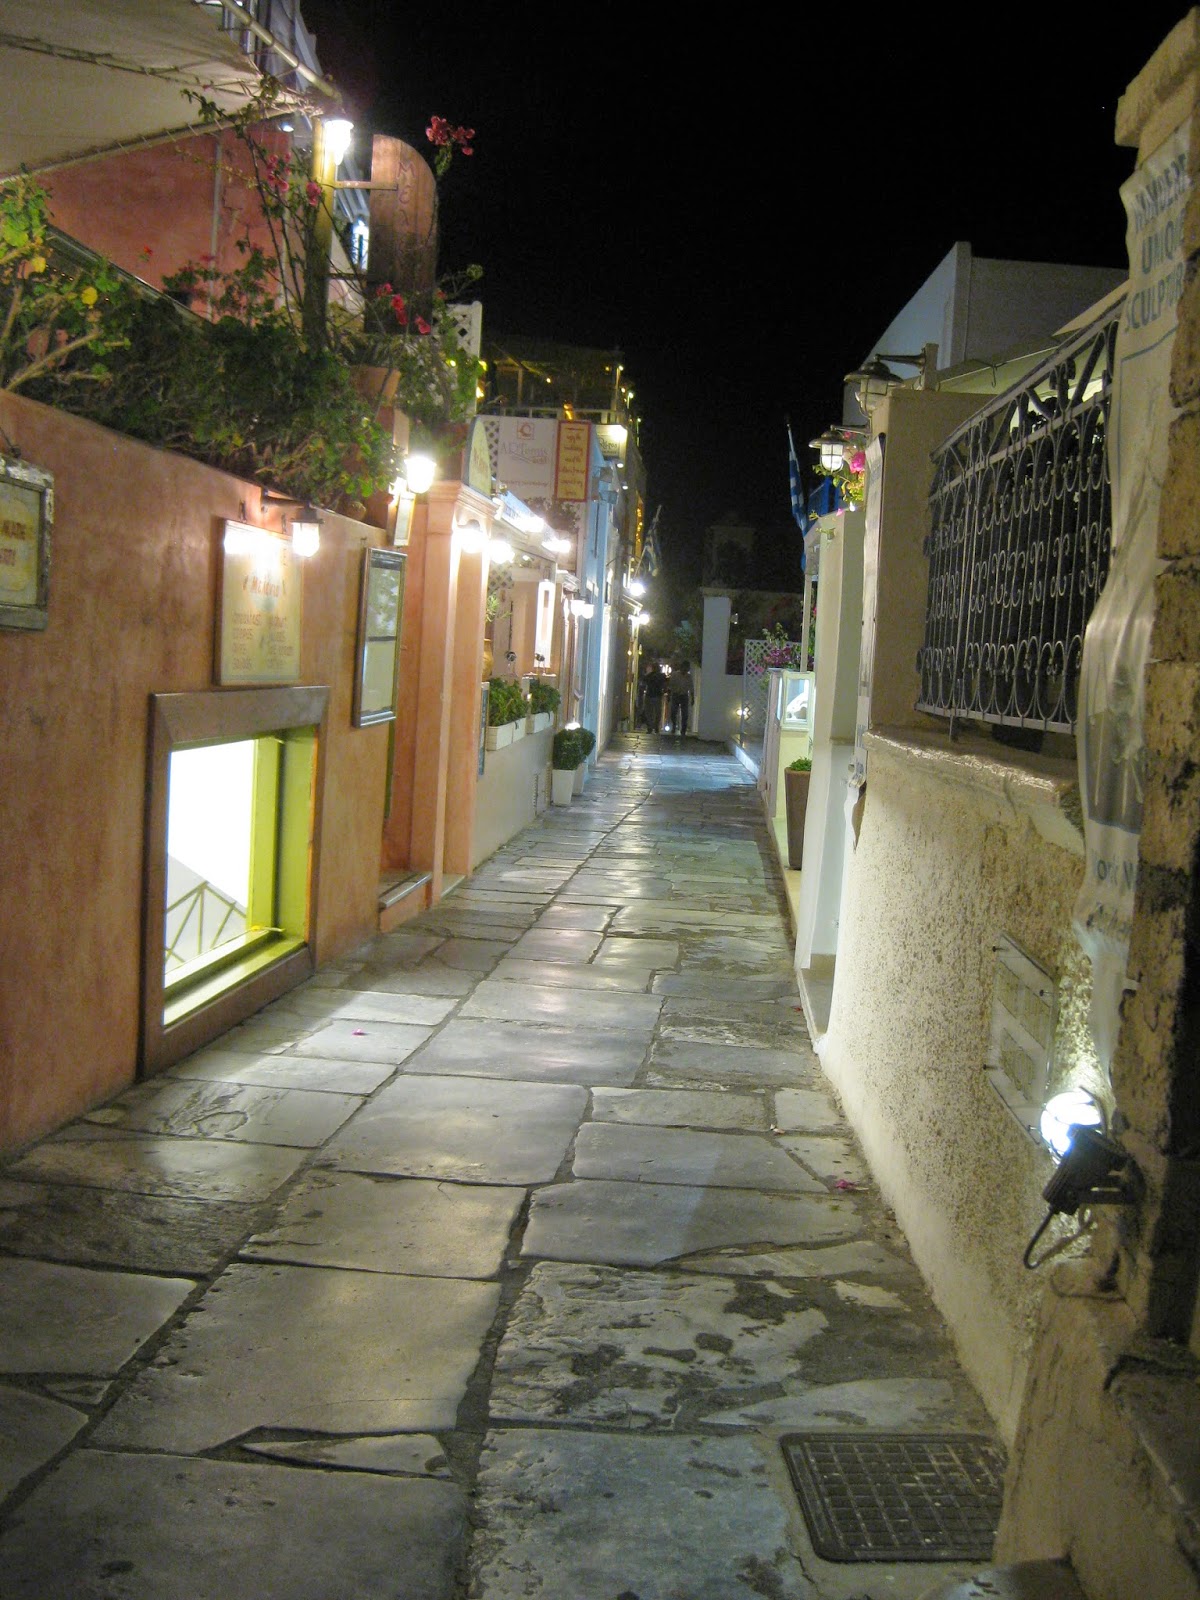 Santorini - The main walk way clears up pretty early at night